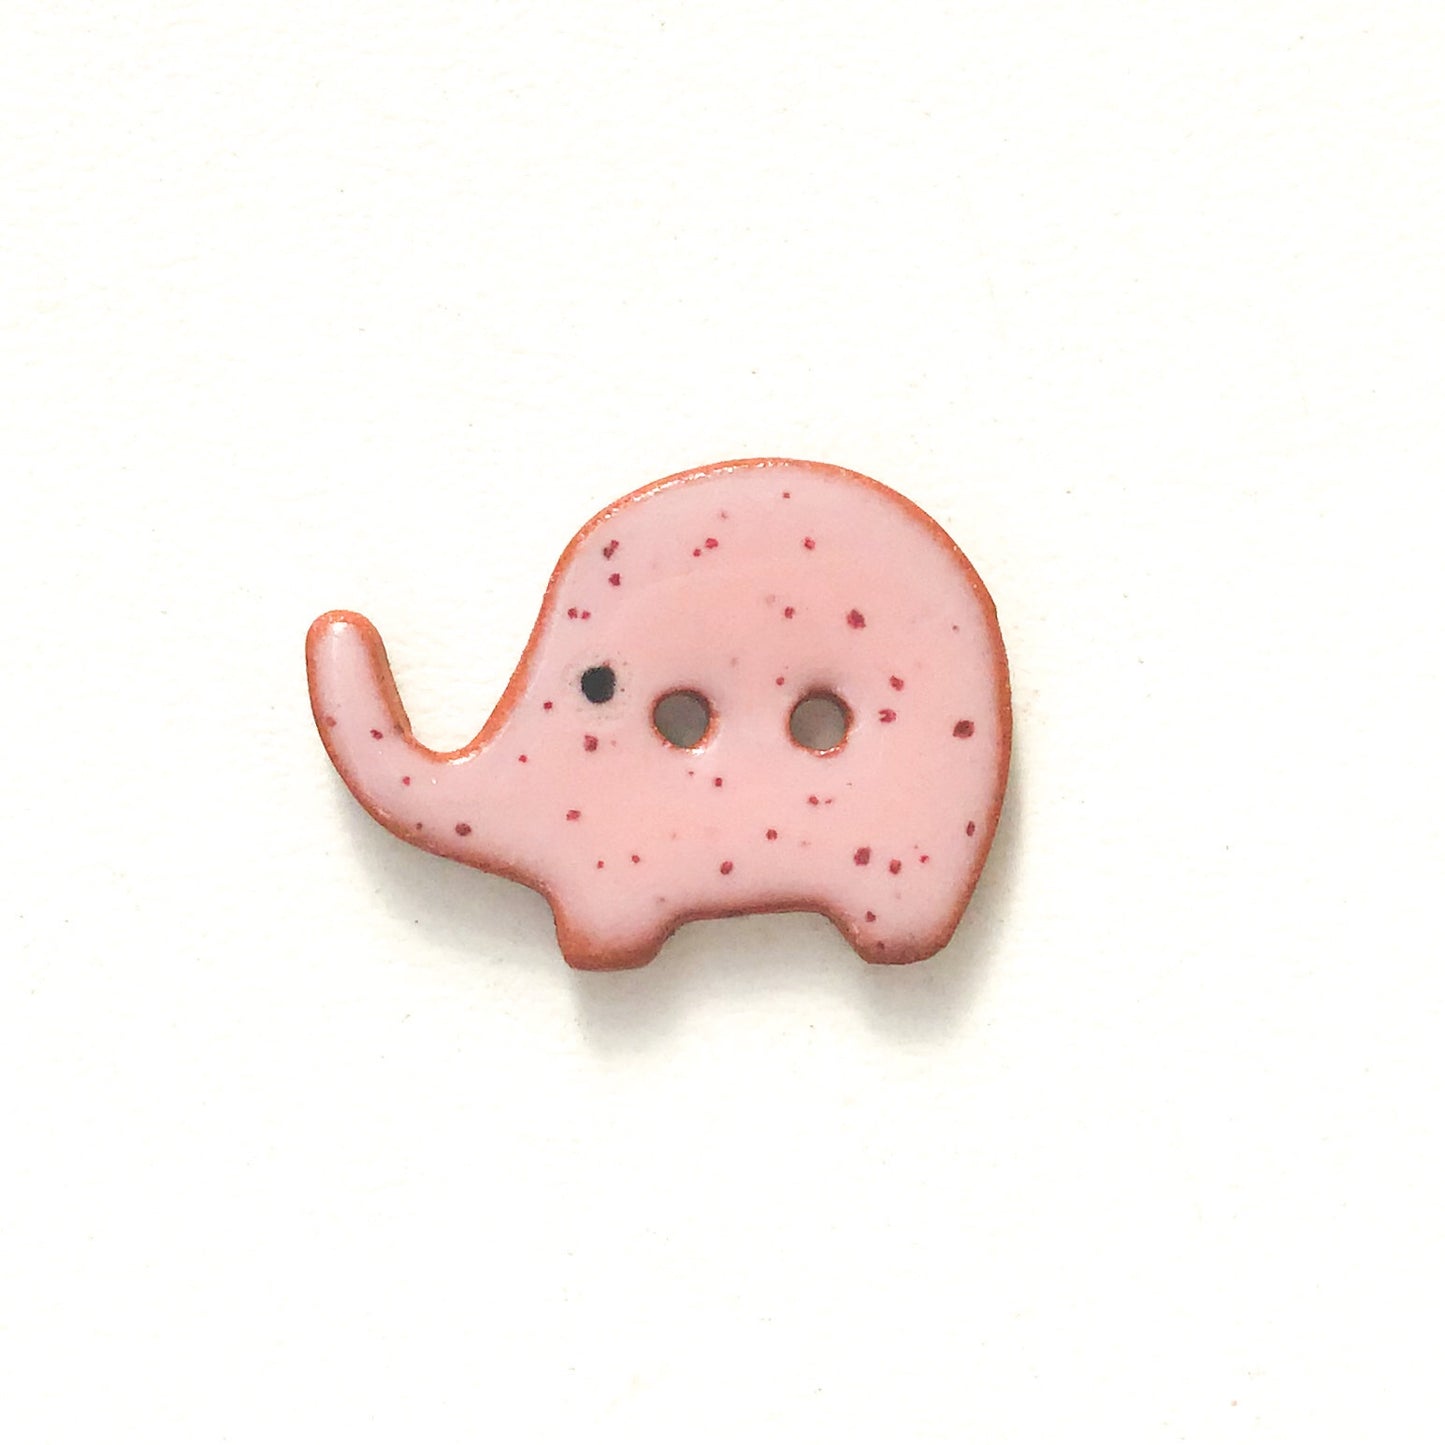 Elephant Buttons - Ceramic Elephant Buttons -Children's Animal Buttons (ws-84)